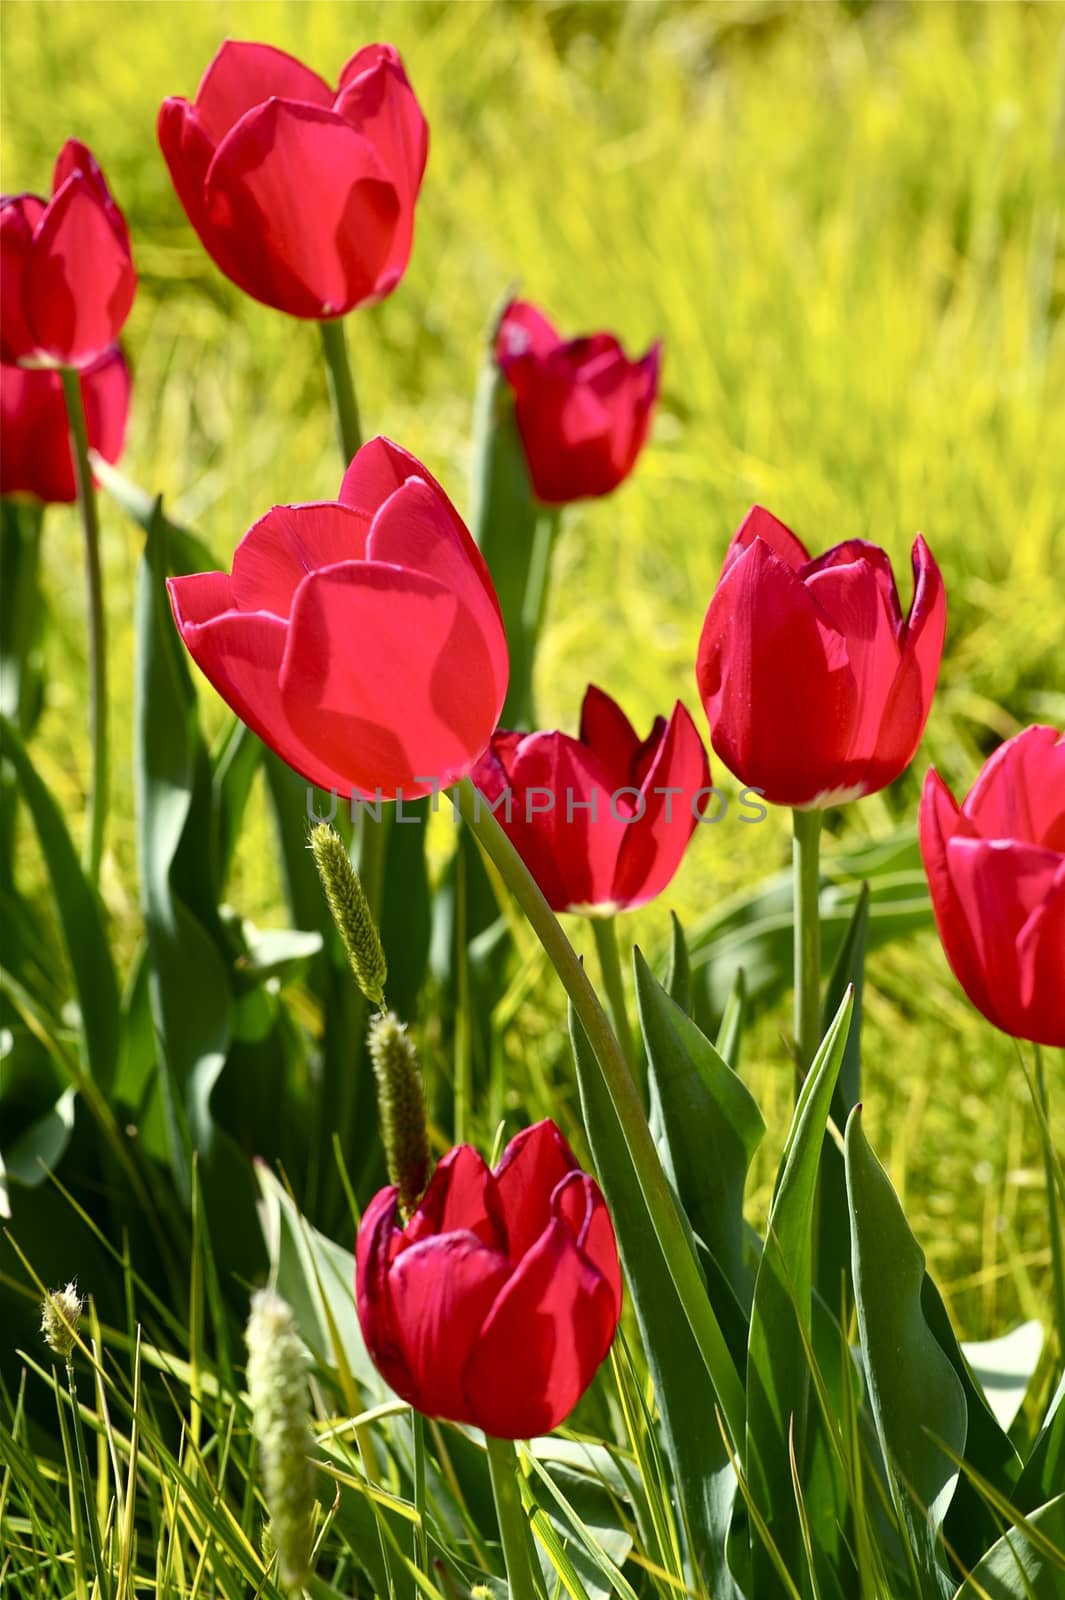 Red Flowering Tulips. Vertical Tulips Photo. Flowers Photo Collection.